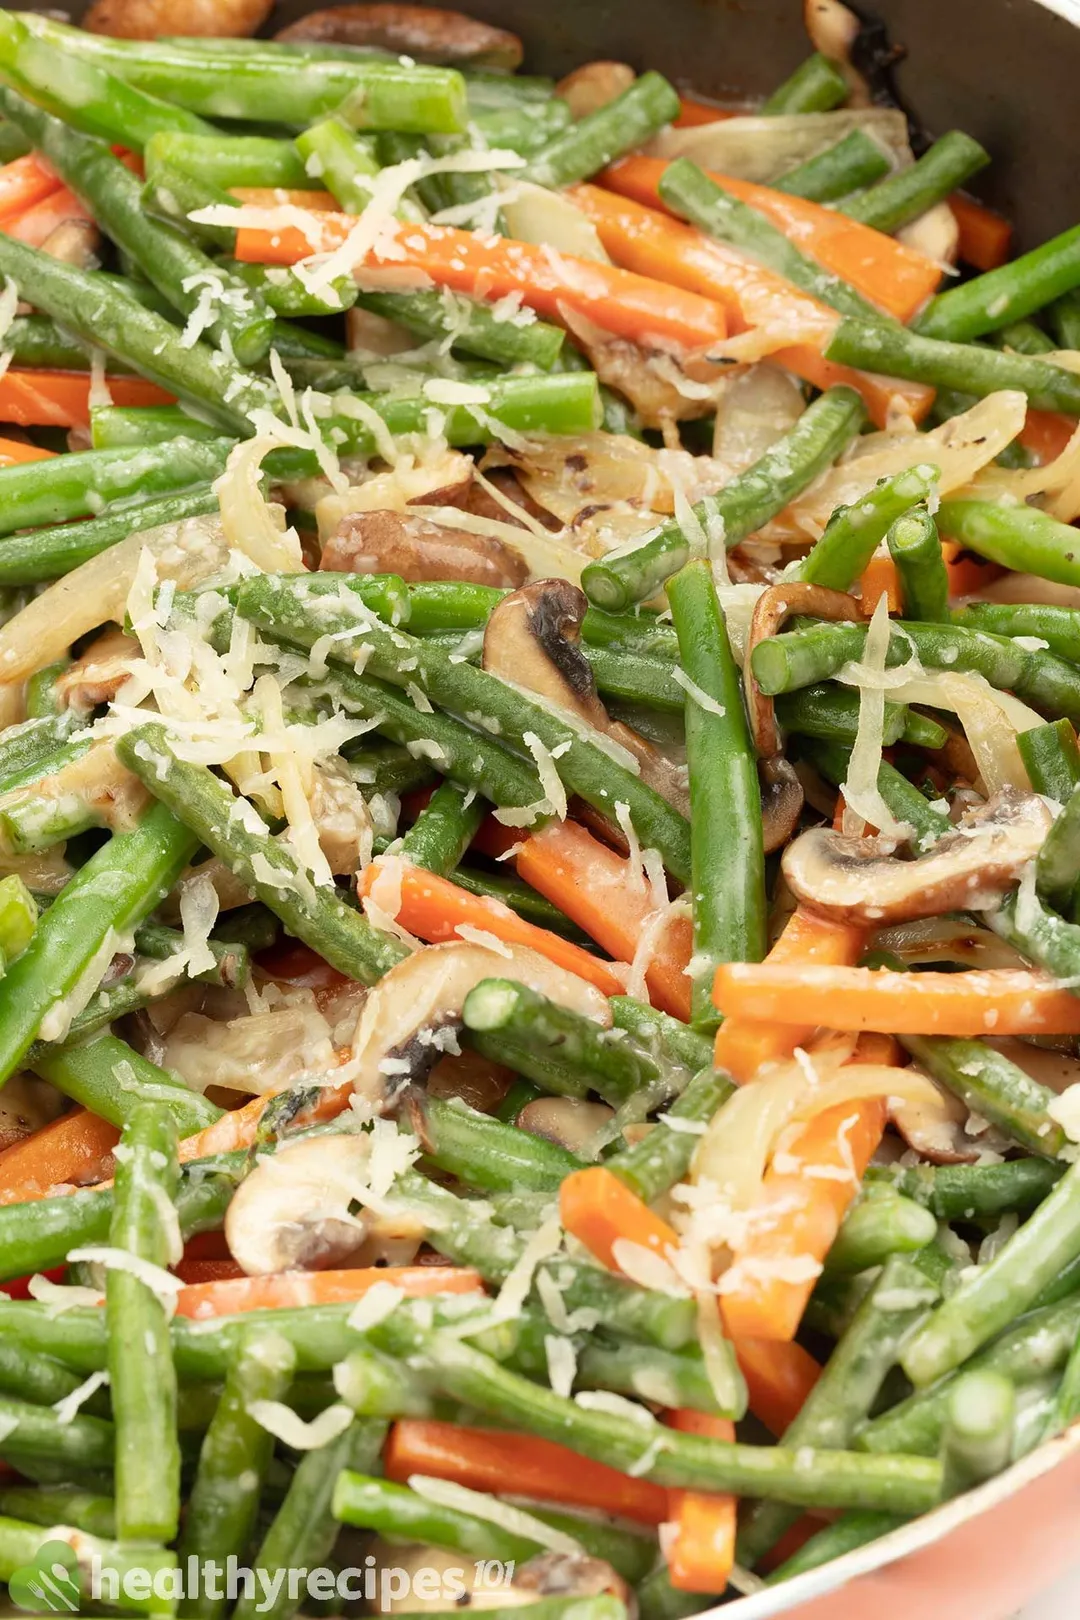 A close-up shot of sauteed green beans, julienned carrots.